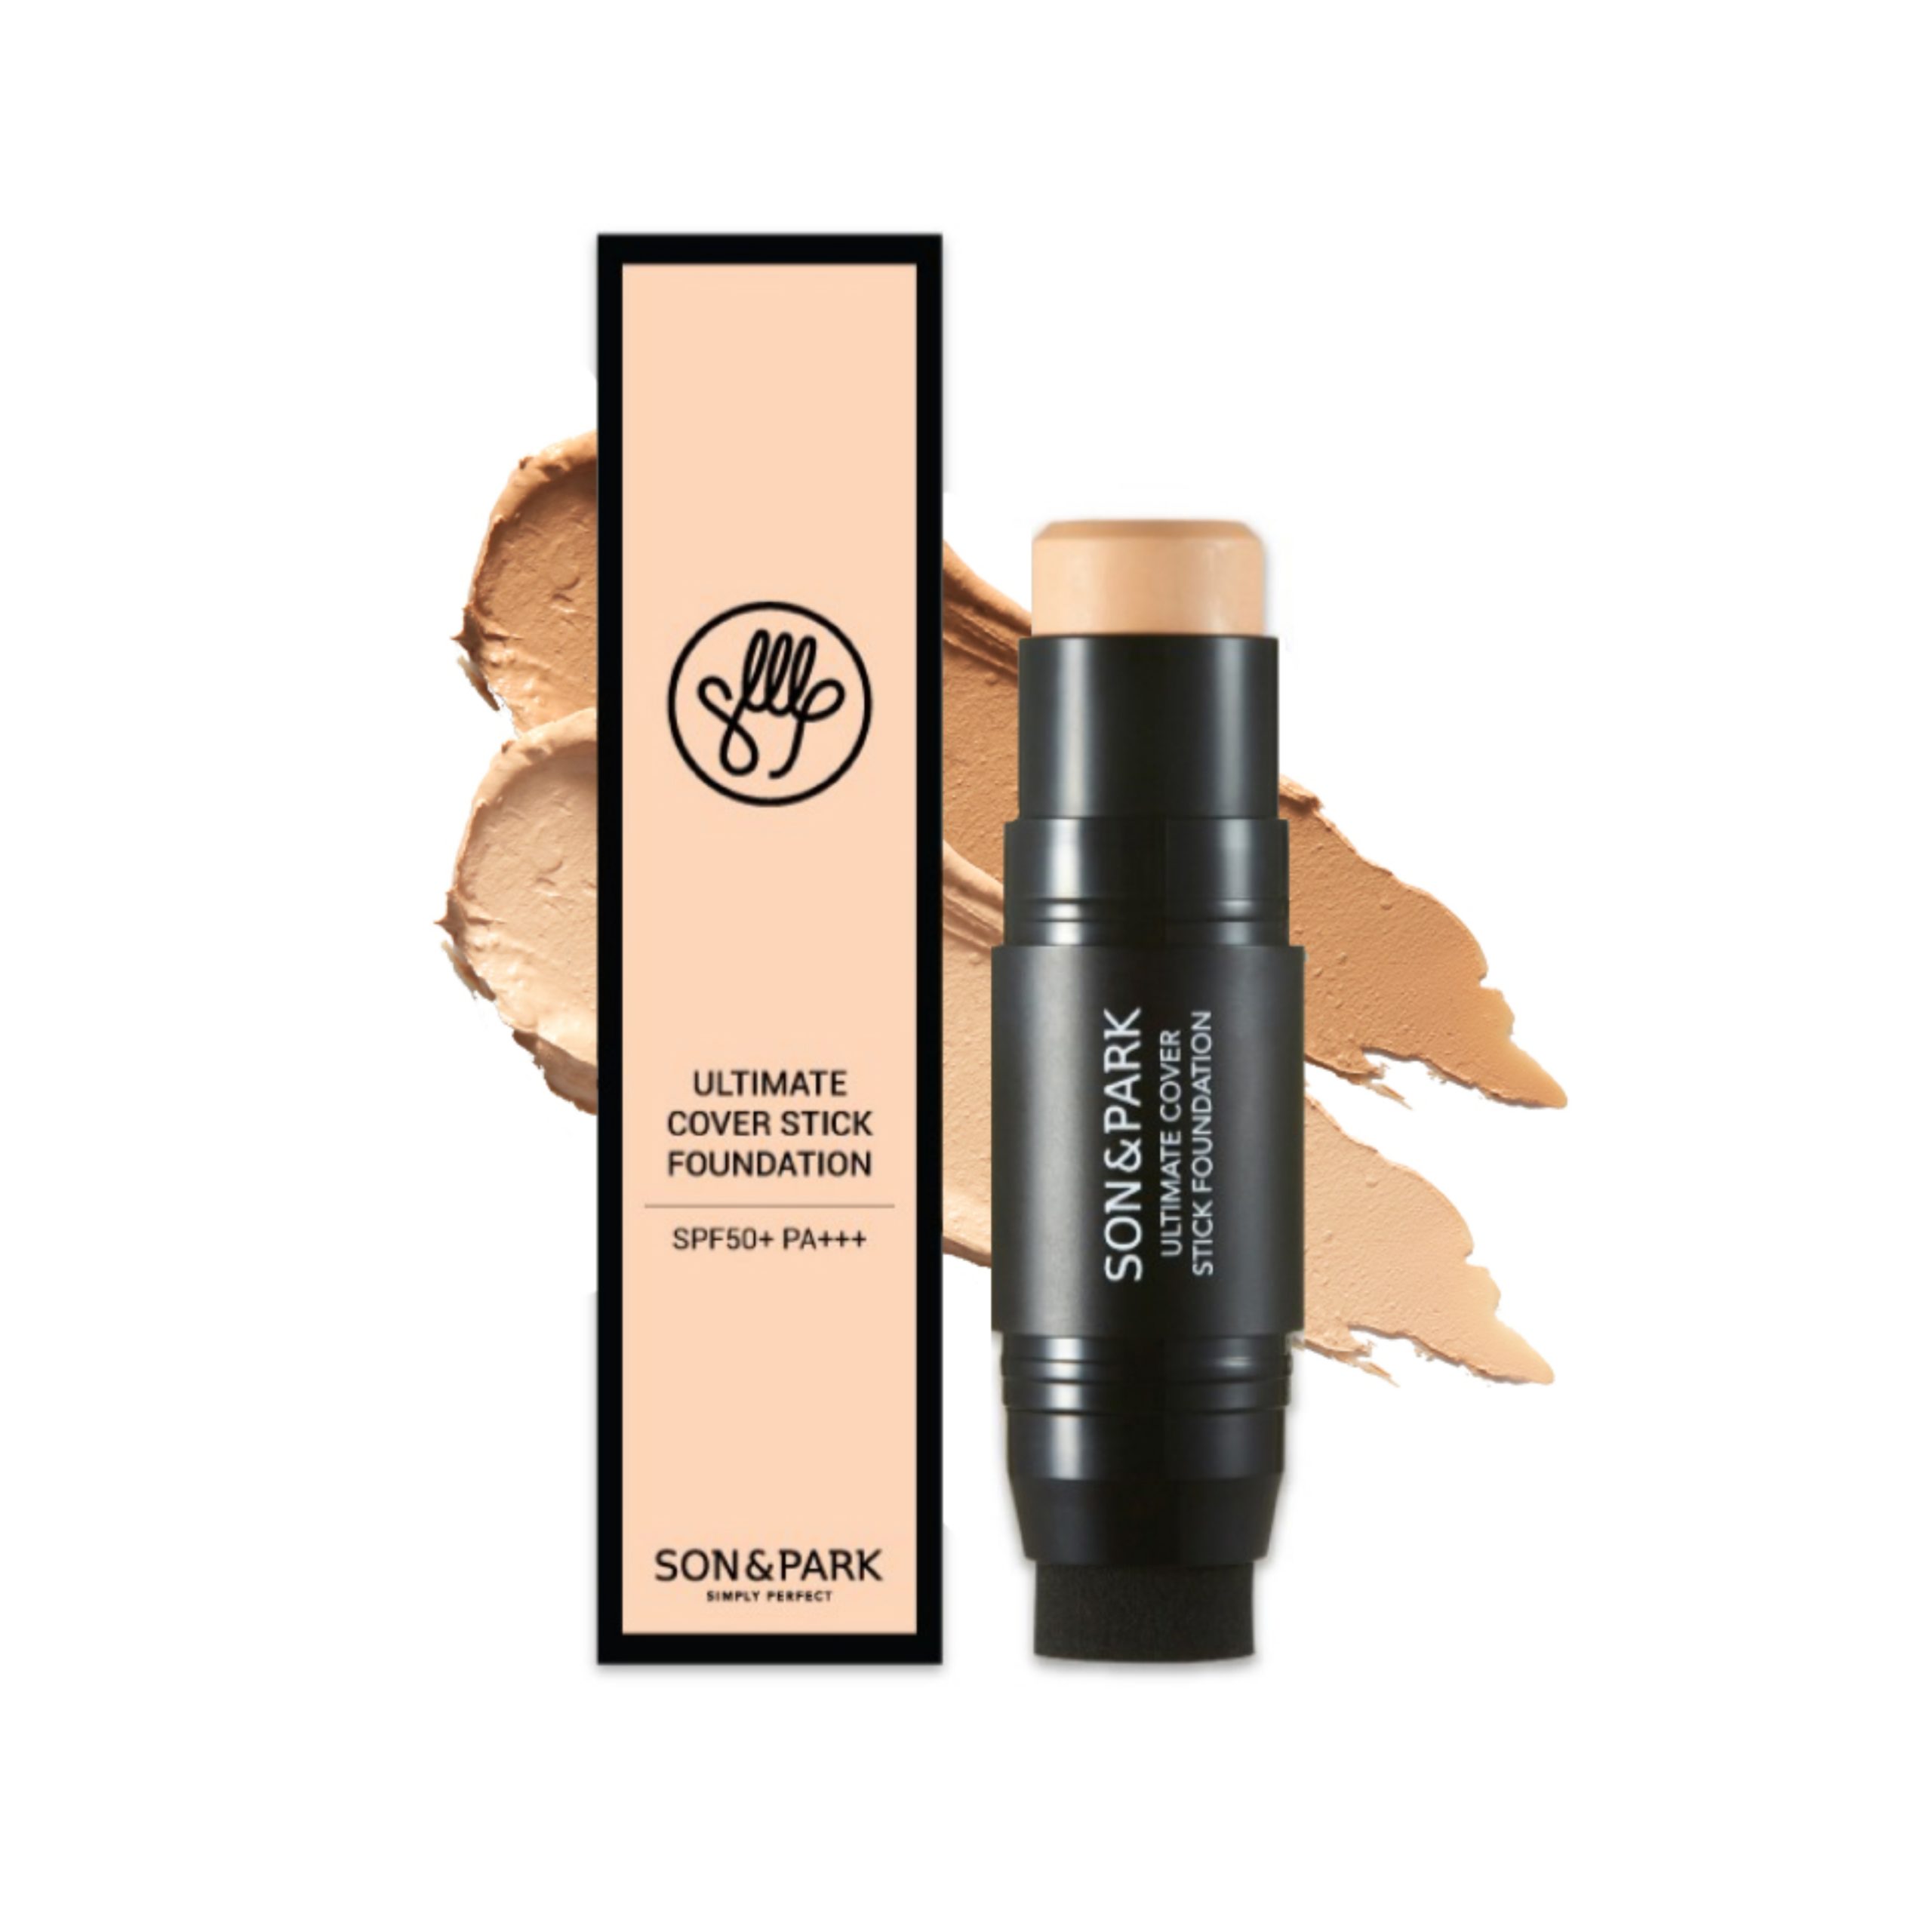 Buy SON&PARK New Ultimate Cover Stick Foundation Online in Malaysia -  Review & Price | Insider Mall